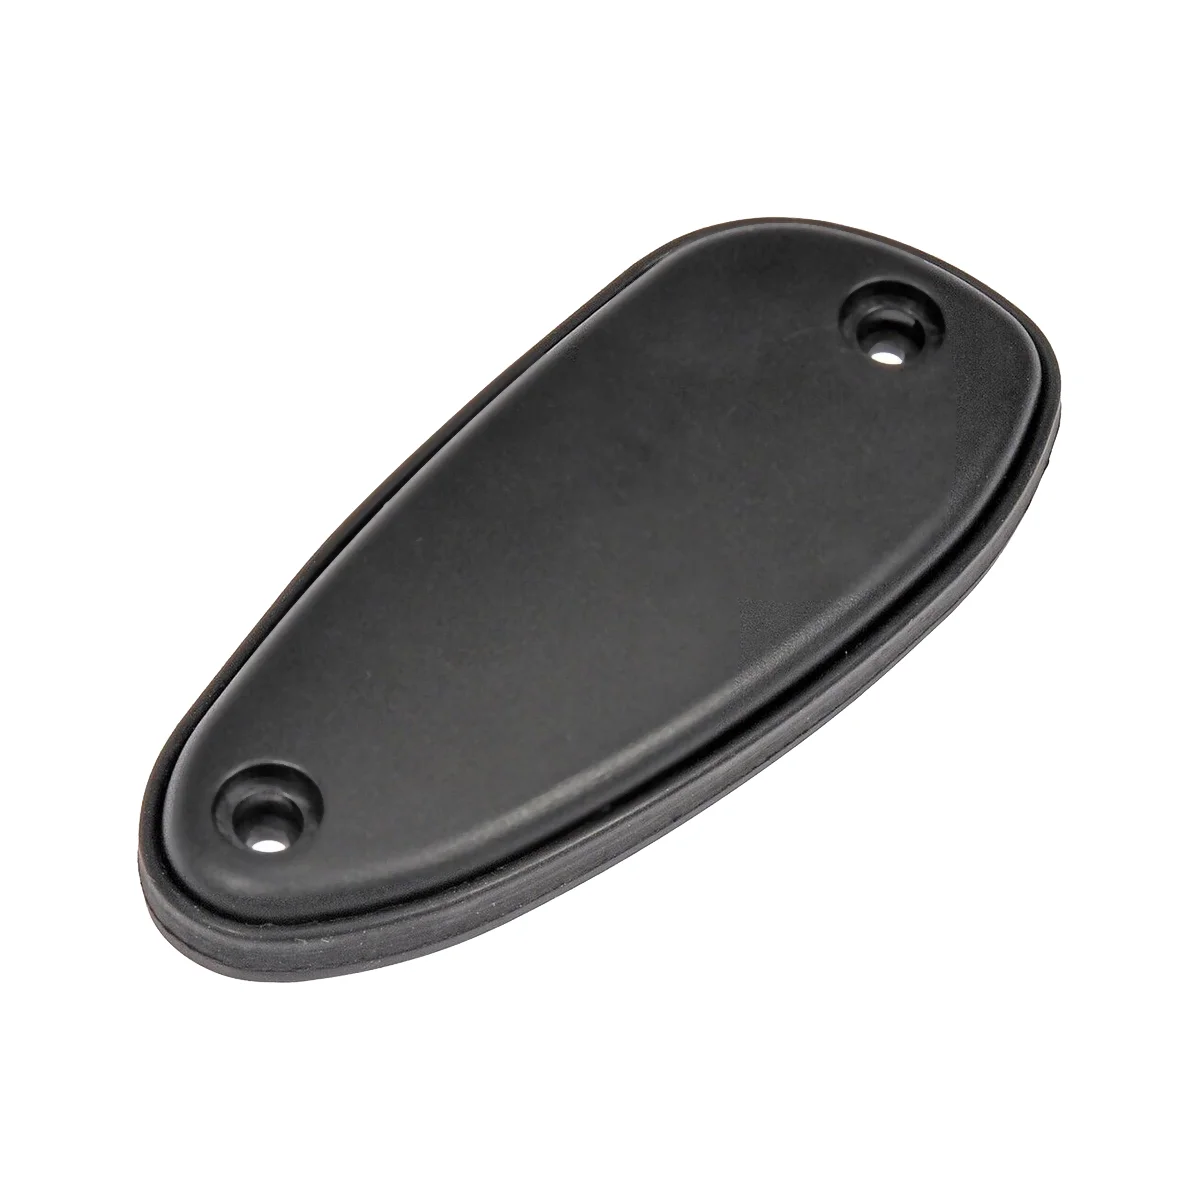 

39152-SR3-A00 Antenna Base is for Honda Civic 1992-2000 Antenna Hole Cover Removal Cover 39152SR3A00